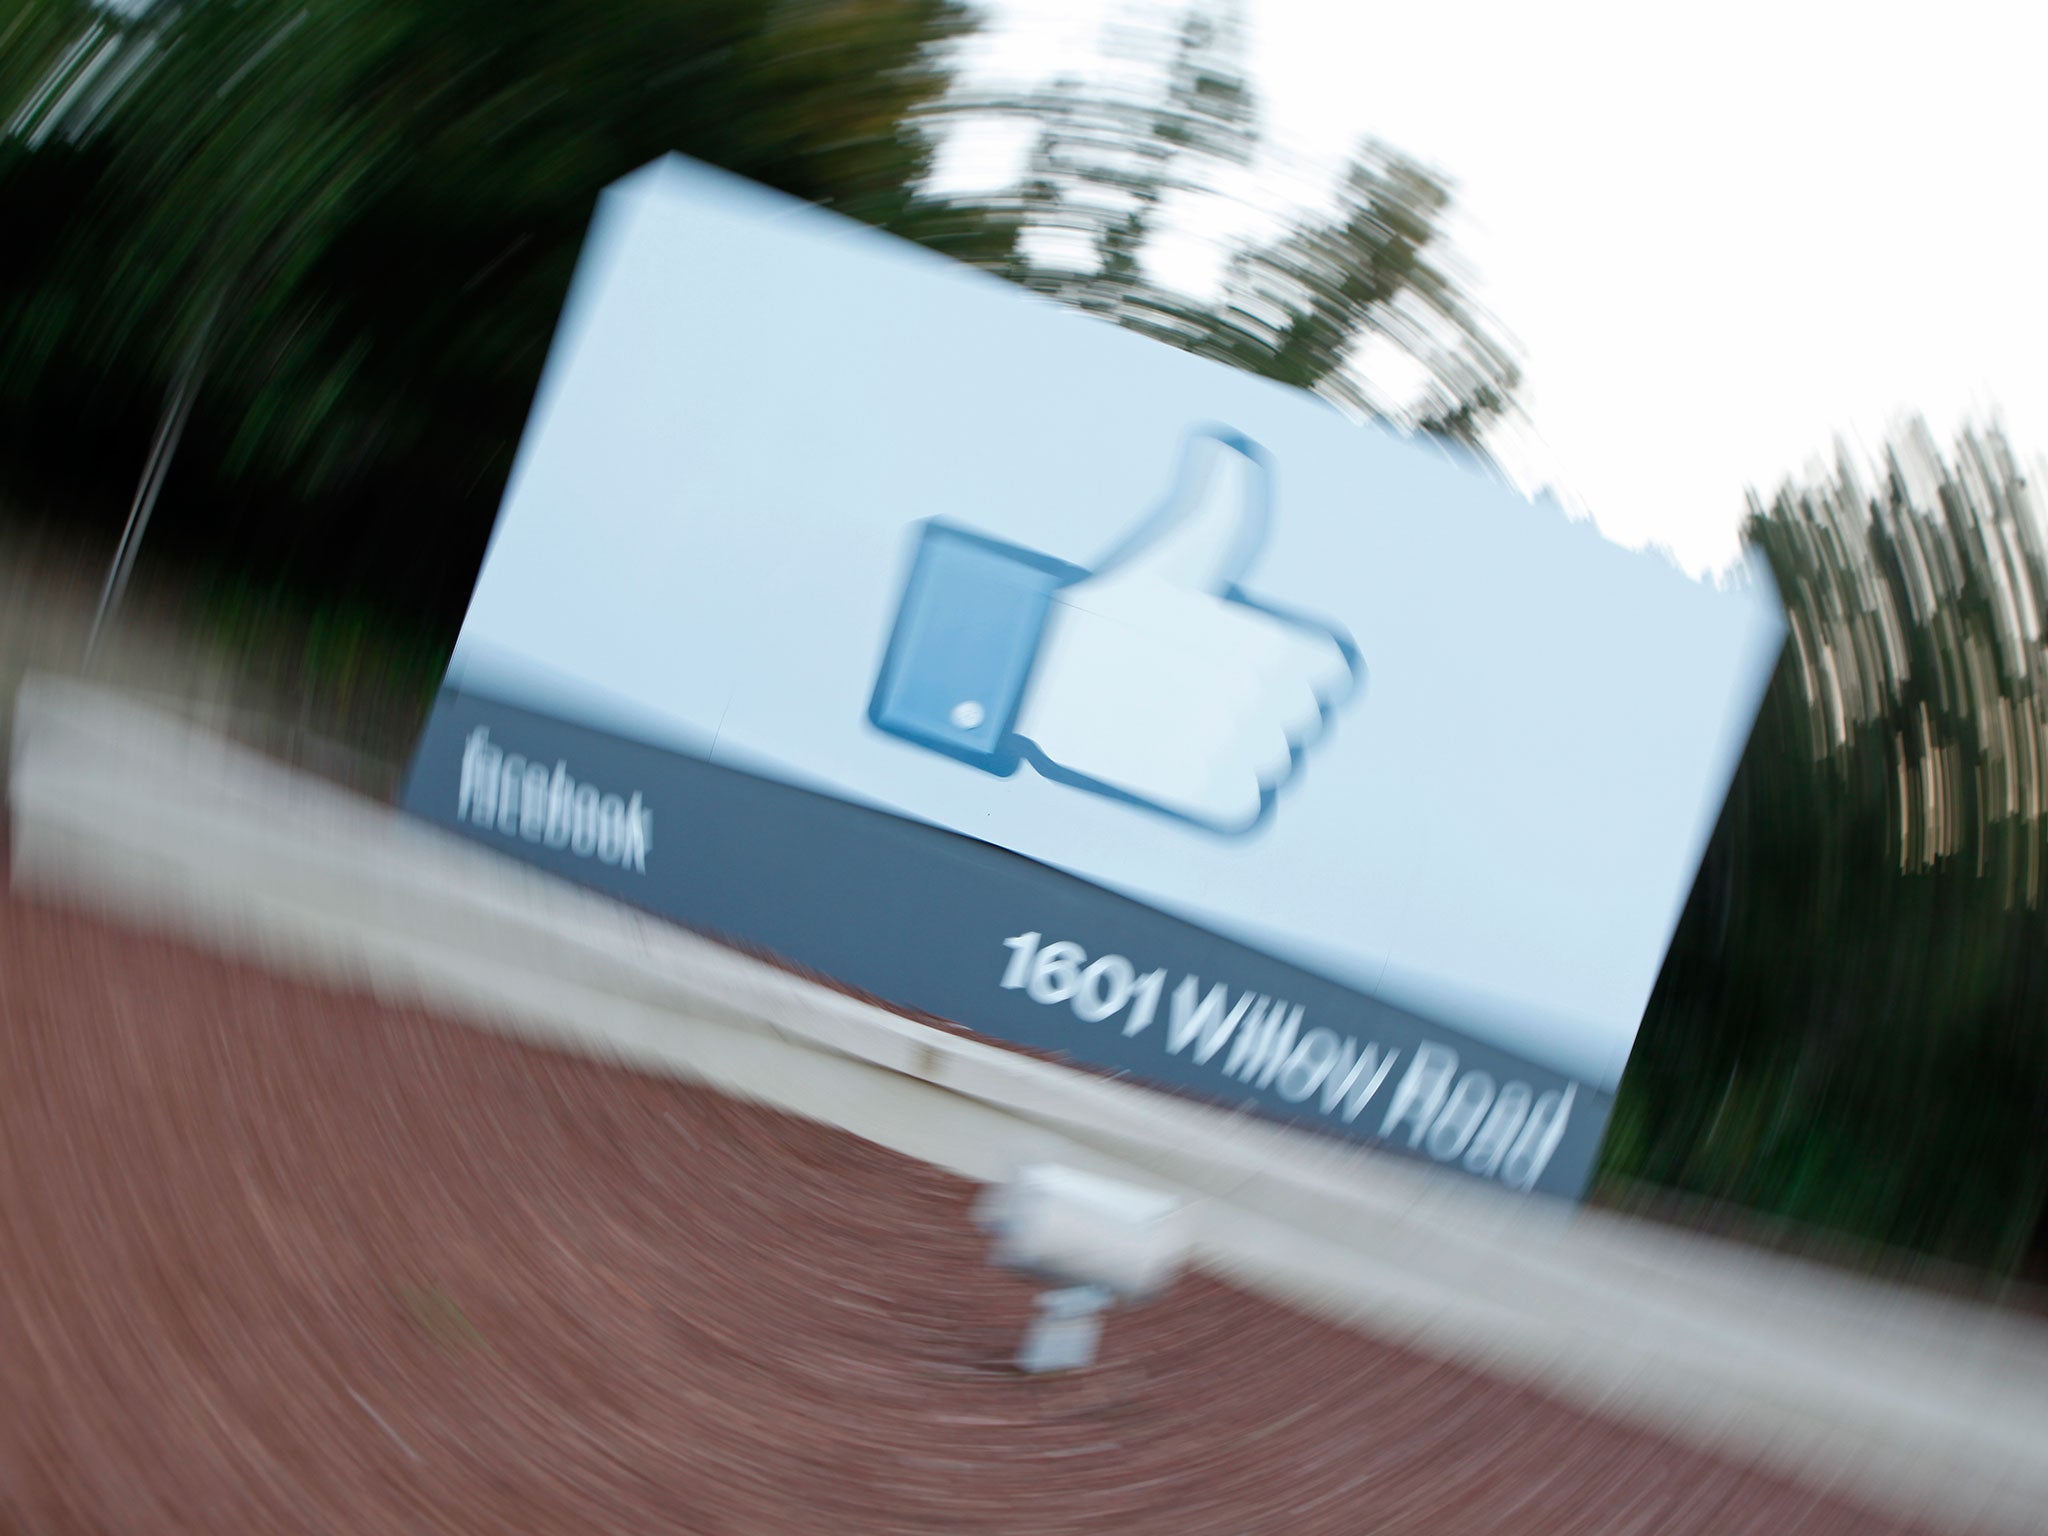 A videographer shoots the side of Facebook's Like Button logo displayed at the entrance of the Facebook Headquarters in Menlo Park, California.